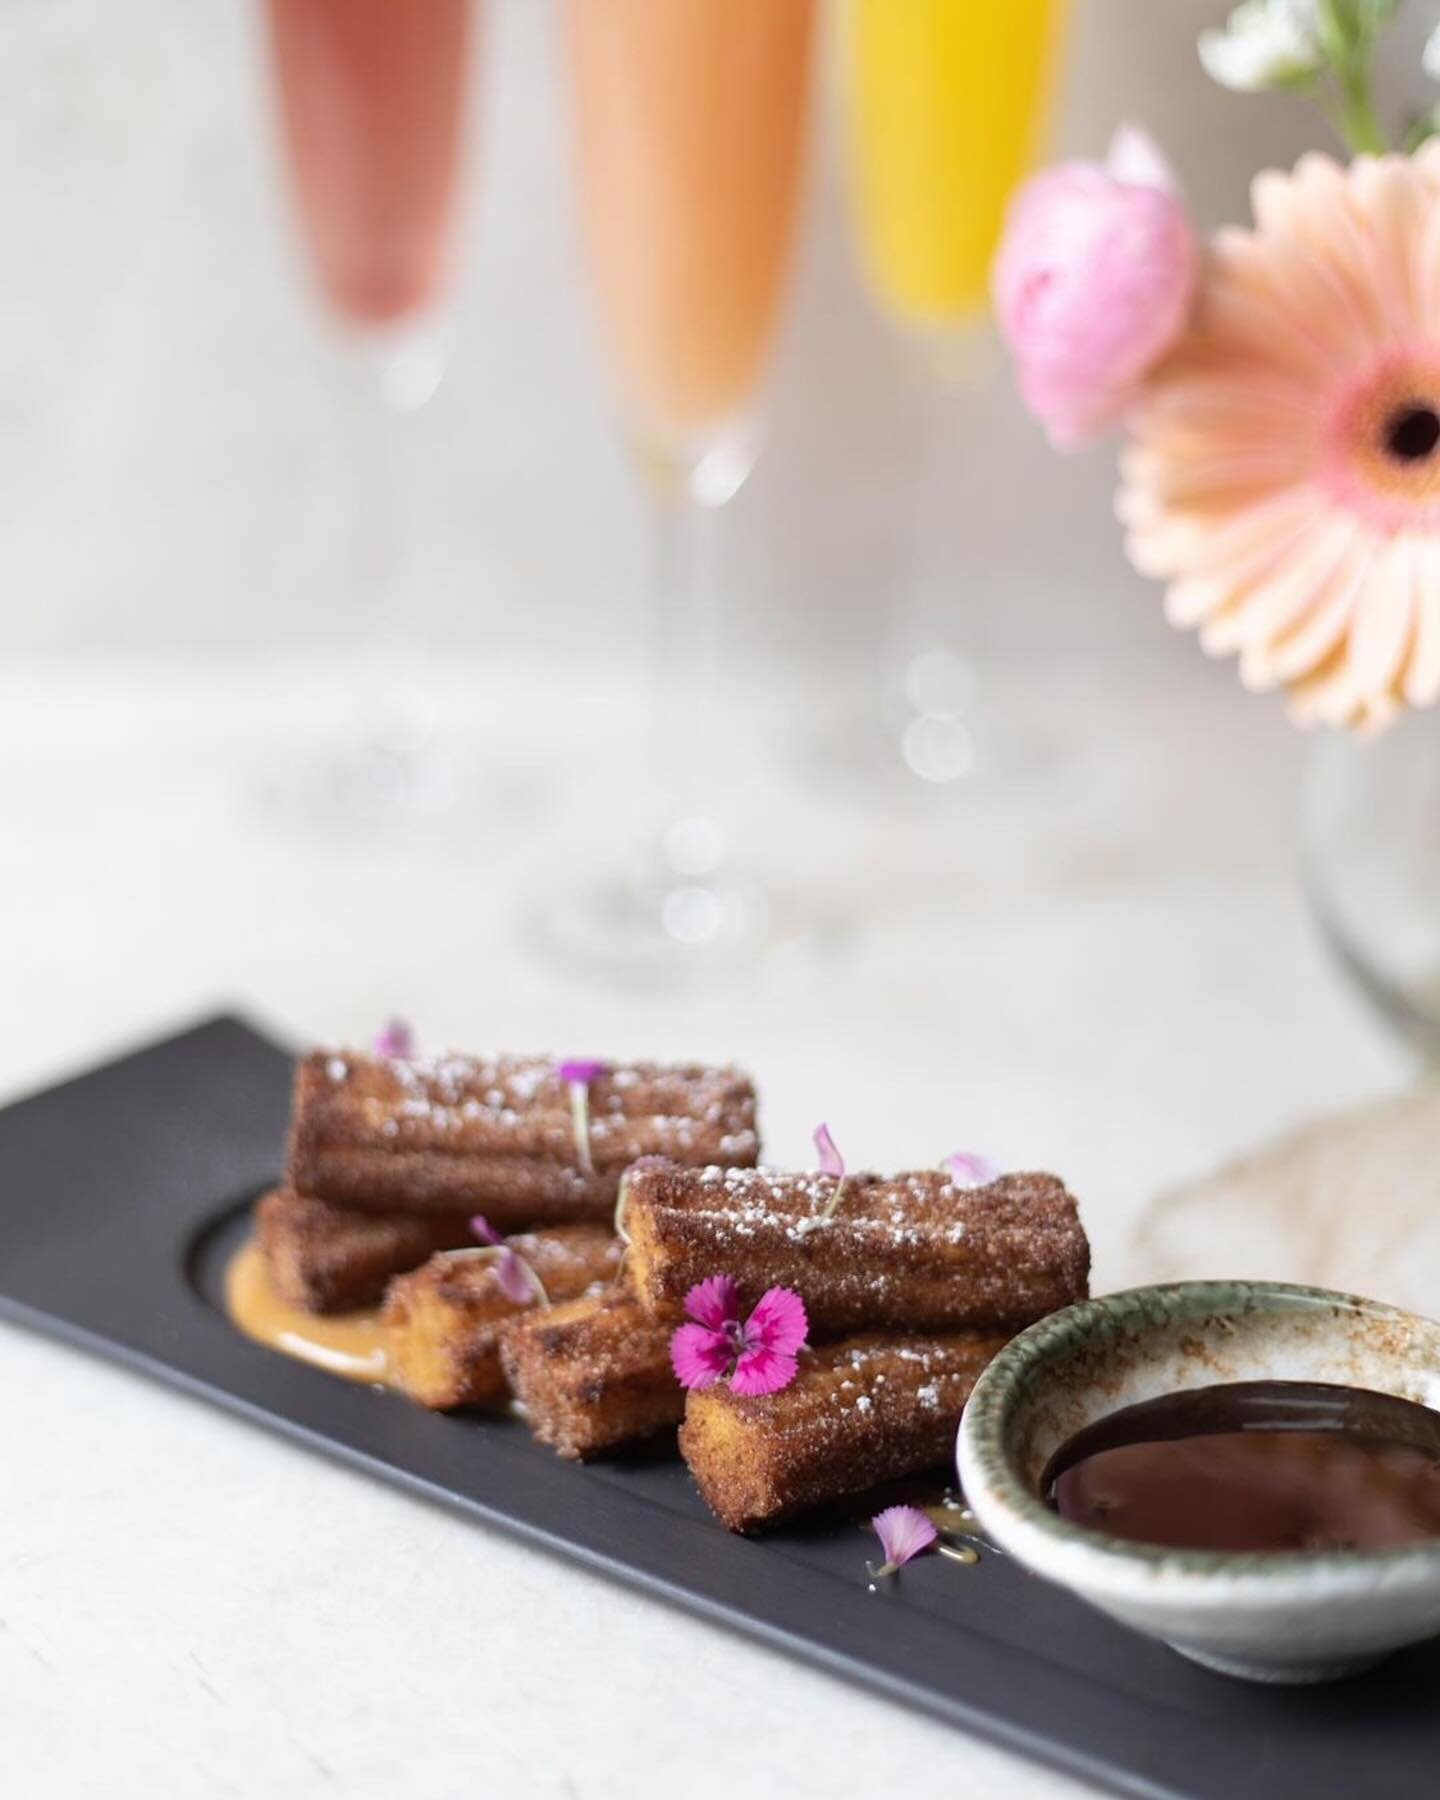 Celebrating Mom's the best way we know how... with a delicious bottomless brunch and flowers. Make a reservation to join us on Mother's Day 5/12. Link in bio.